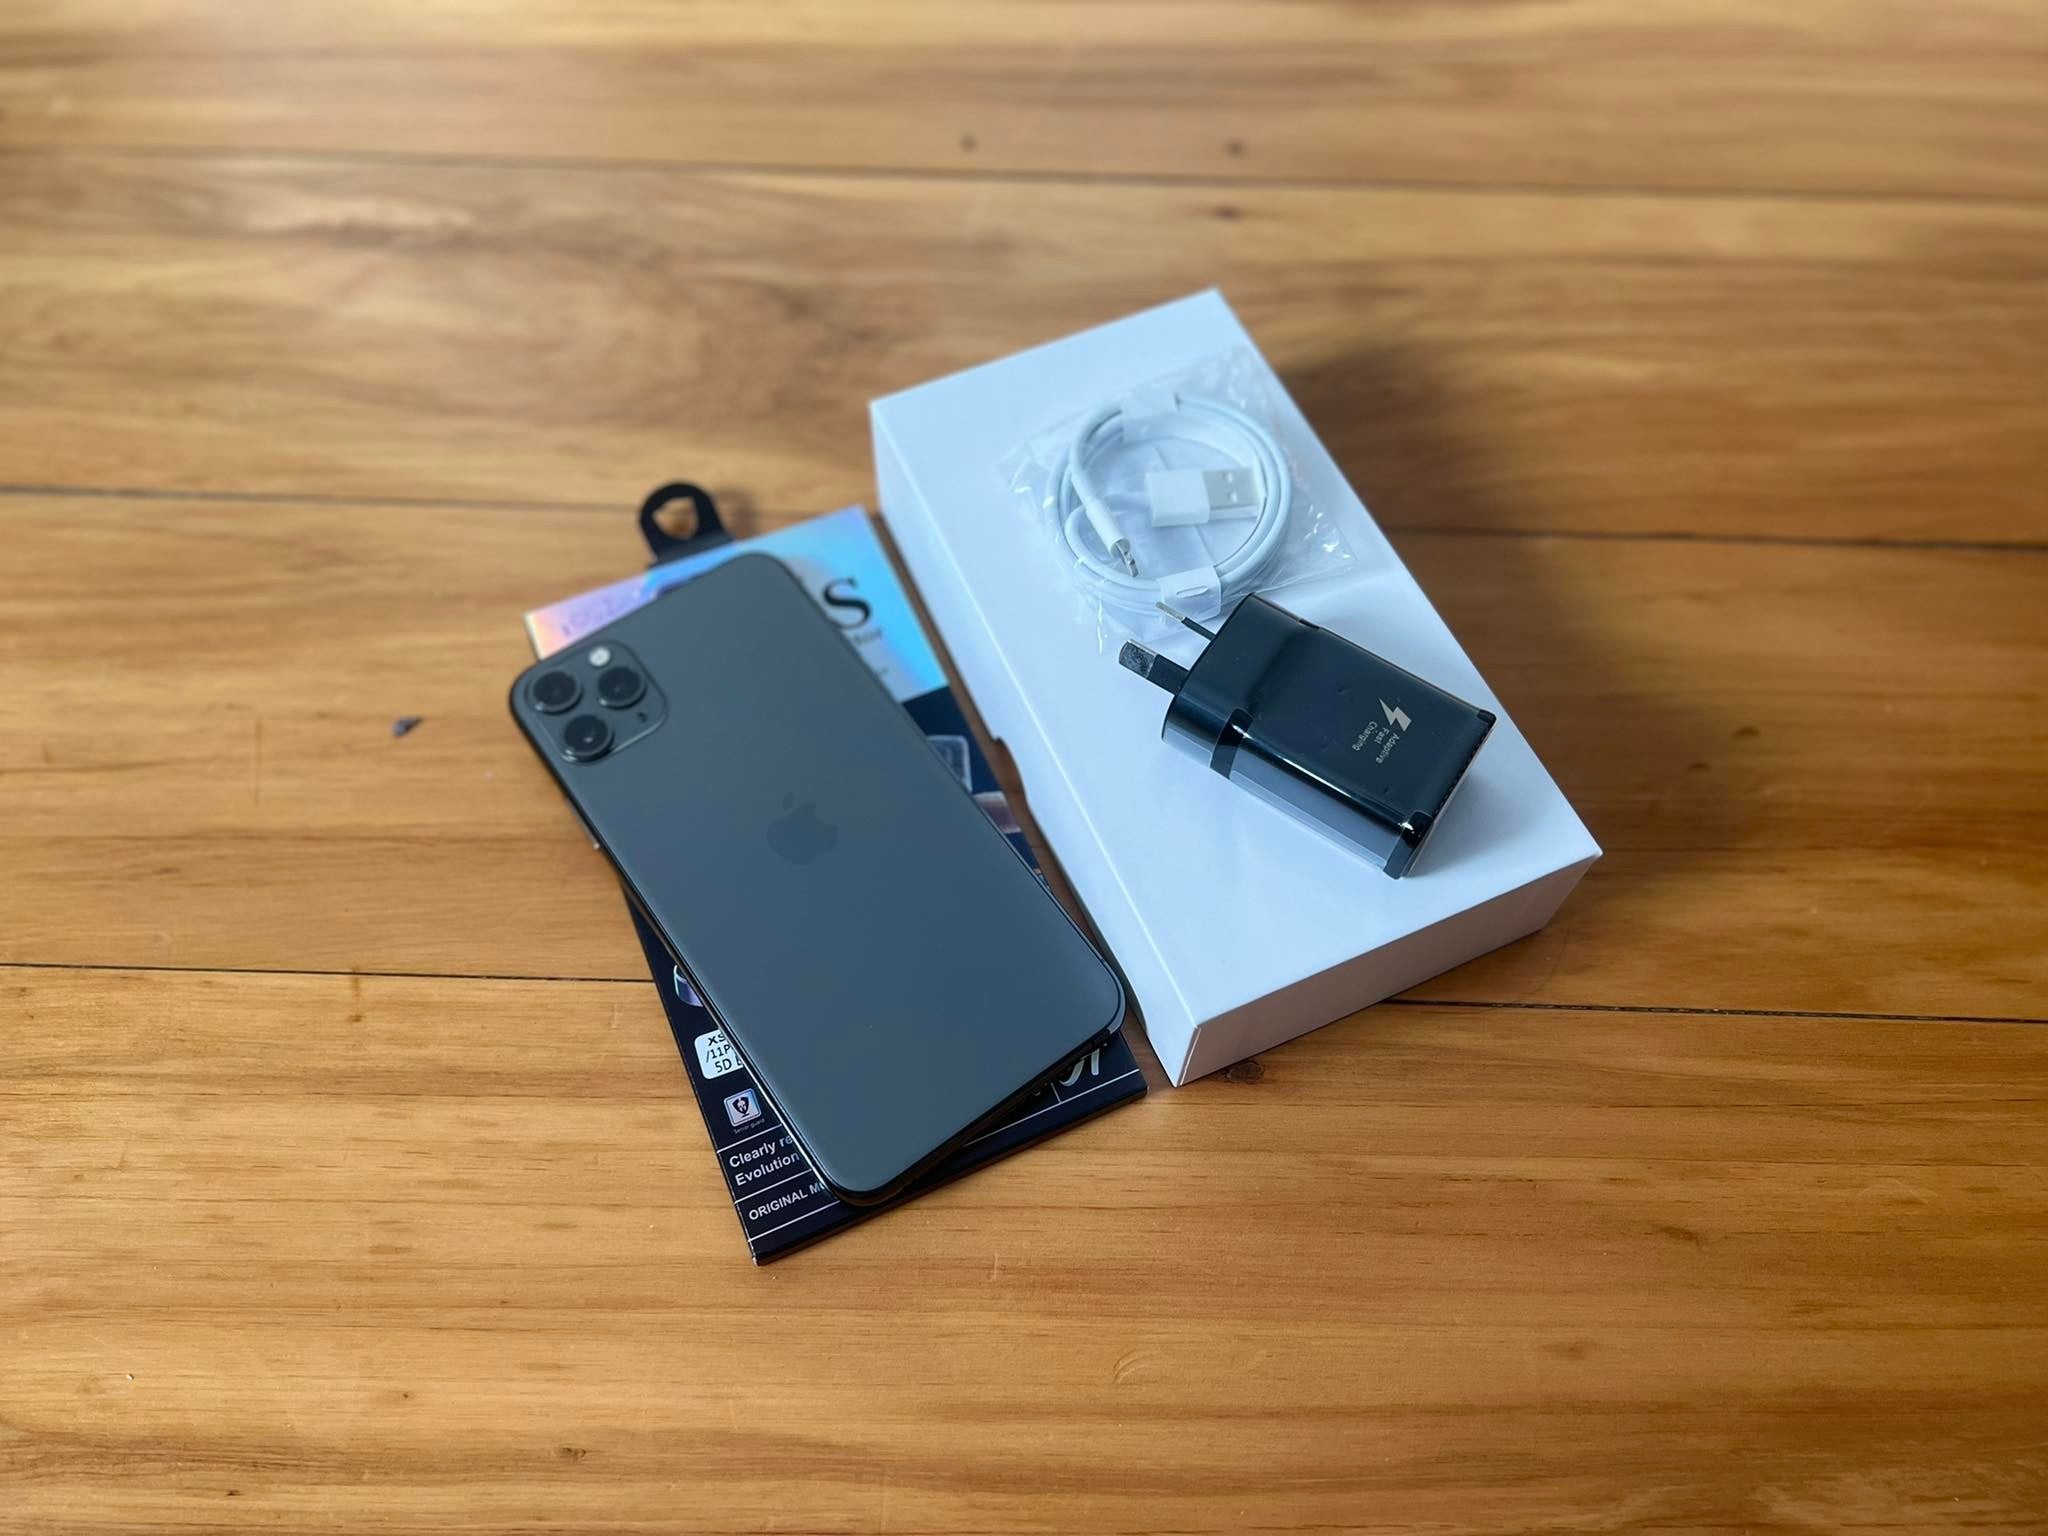 Apple iPhone 11 Pro Max 256GB Gray (As New) New Battery, Case, Glass Screen Protector & Shipping